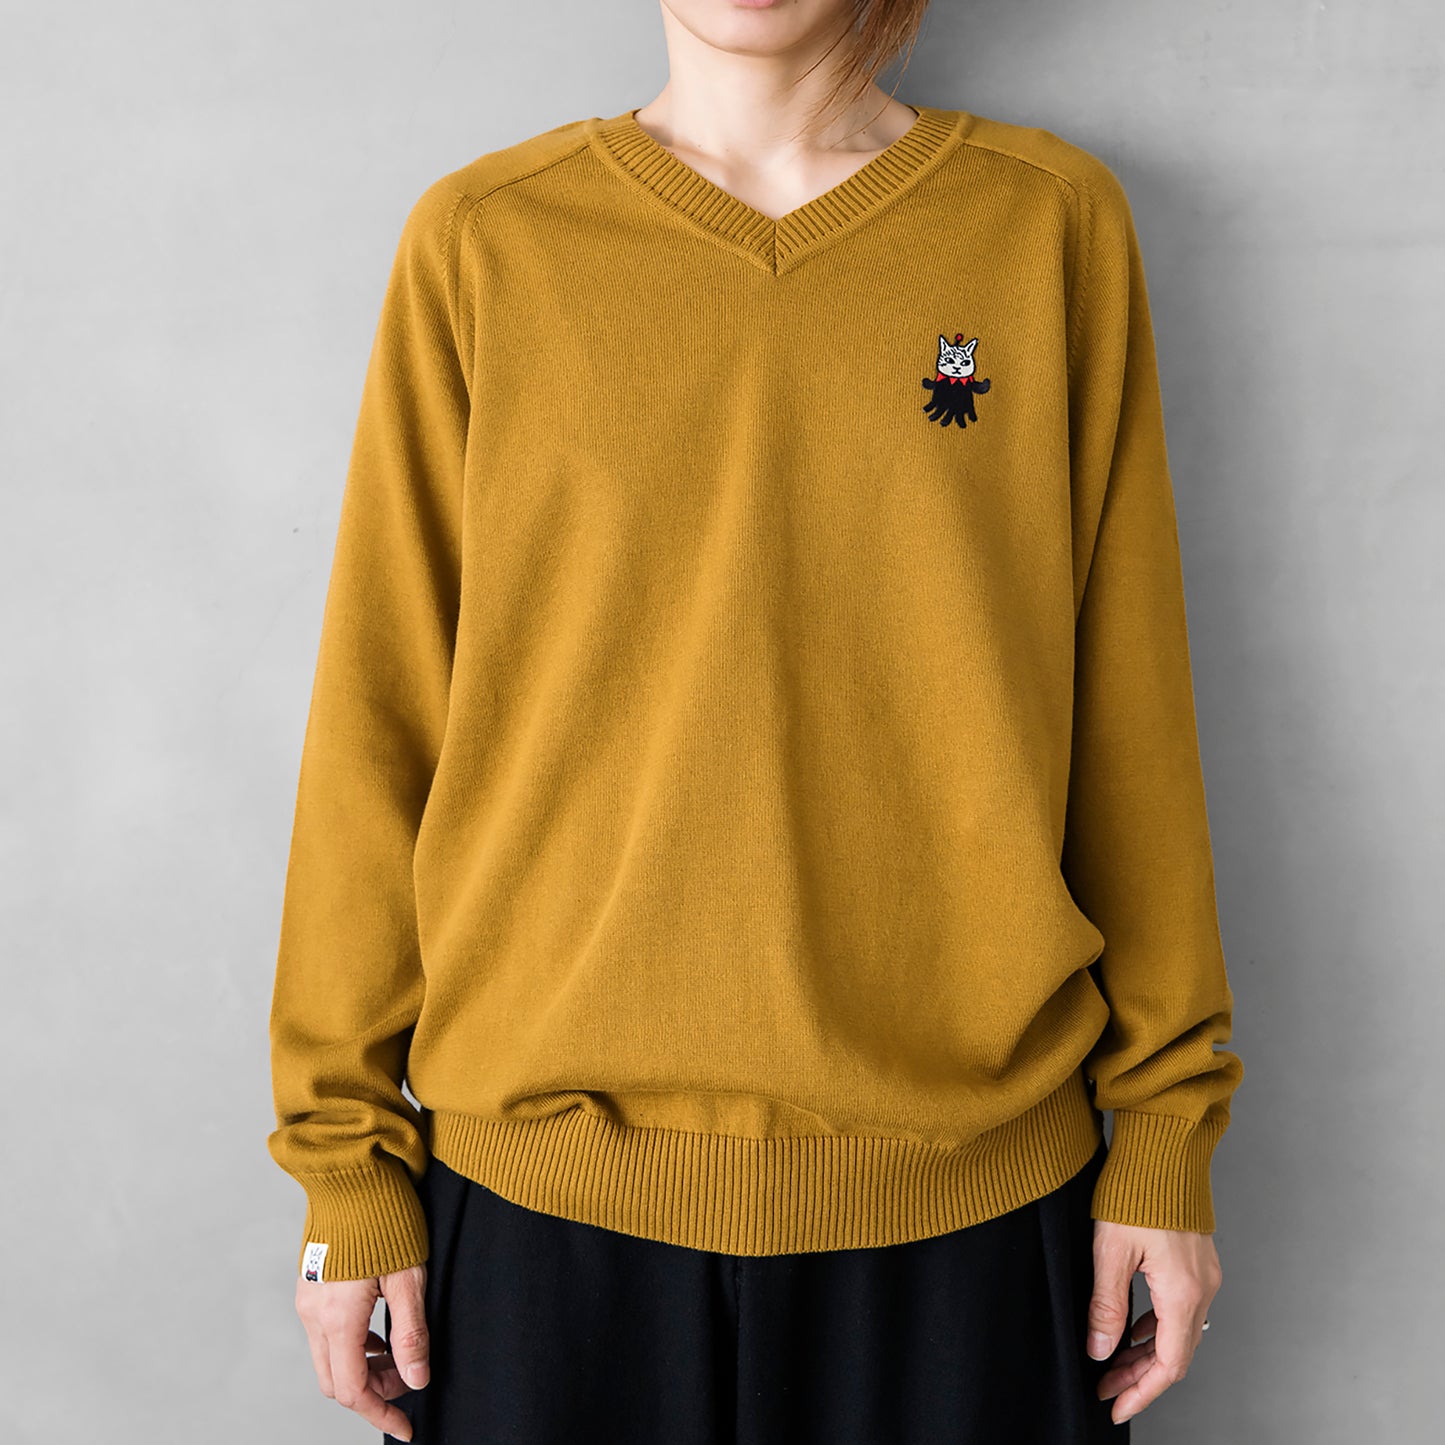 [Items to be matched (patch sold separately)] V-neck sweater, patch: 1 left chest